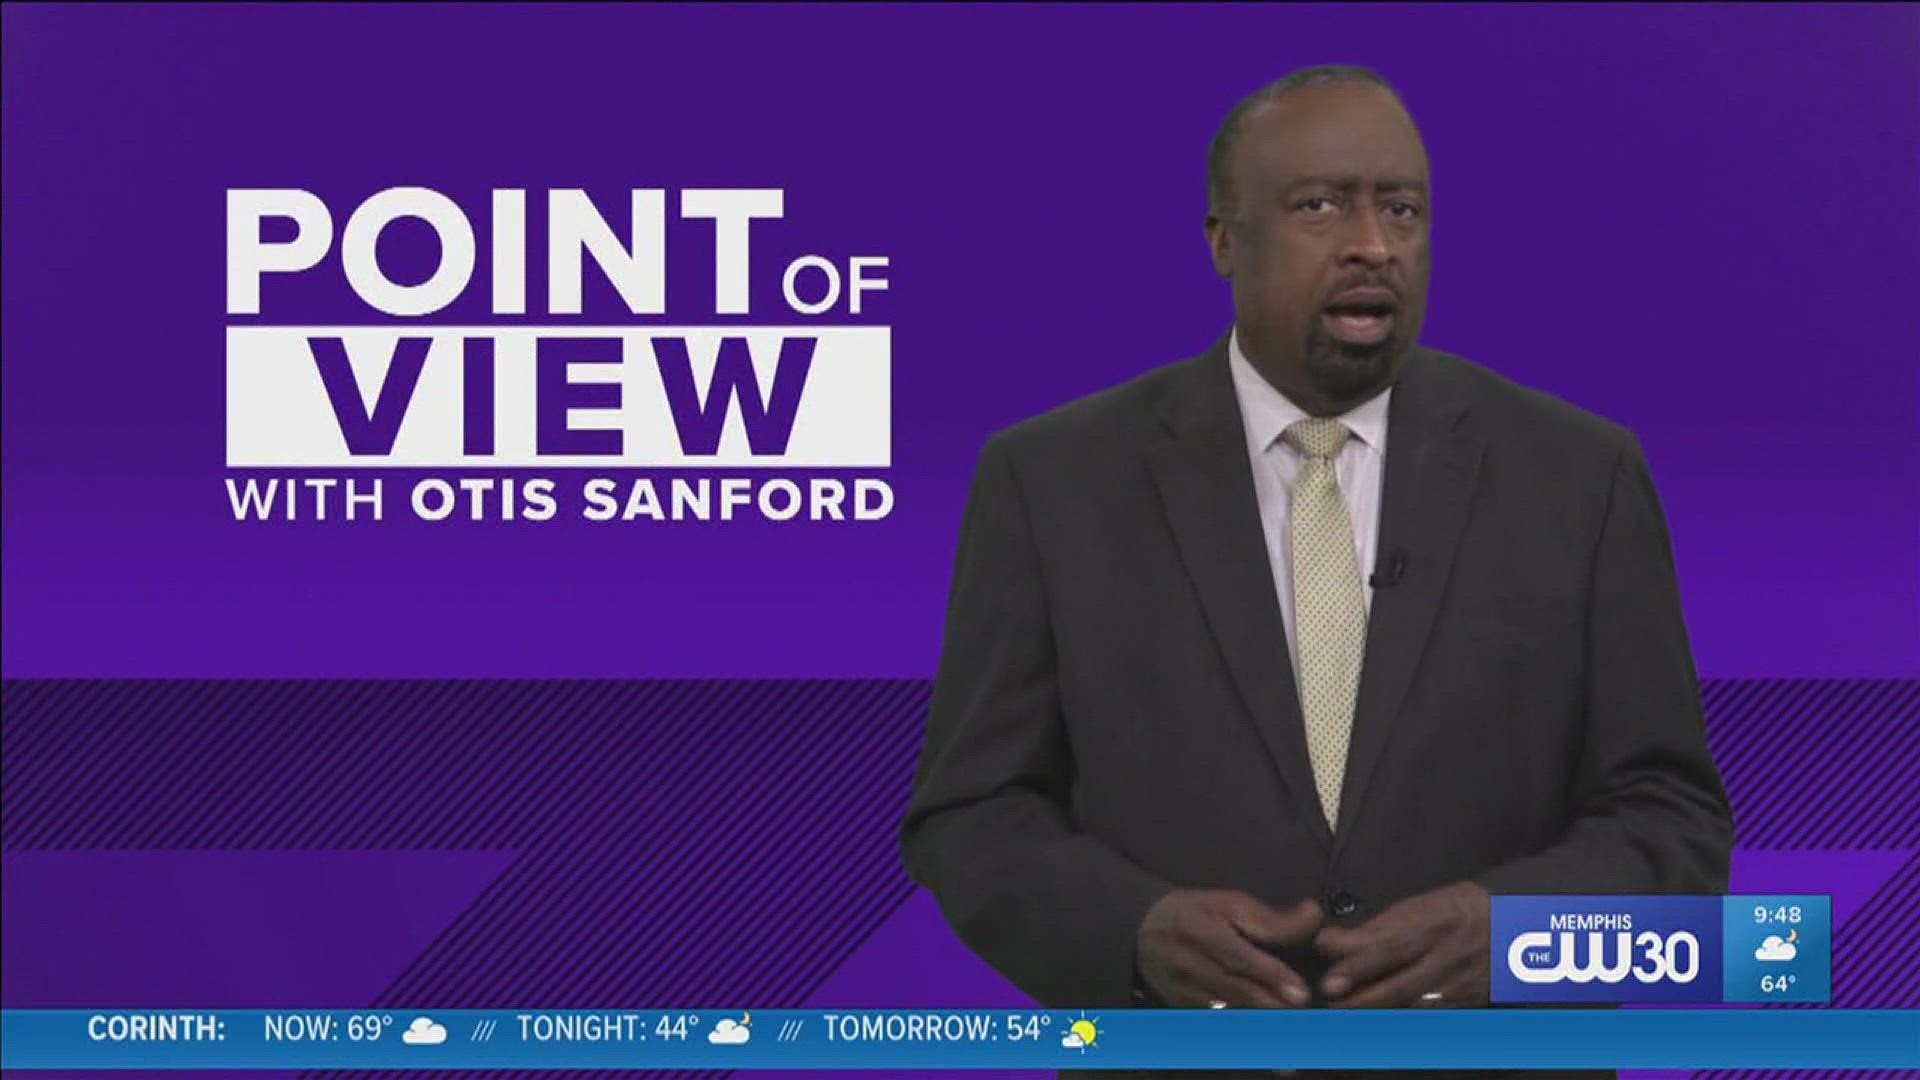 Otis Sanford gives his point of view on what he thinks the New Year's resolutions for Memphis should be this year.